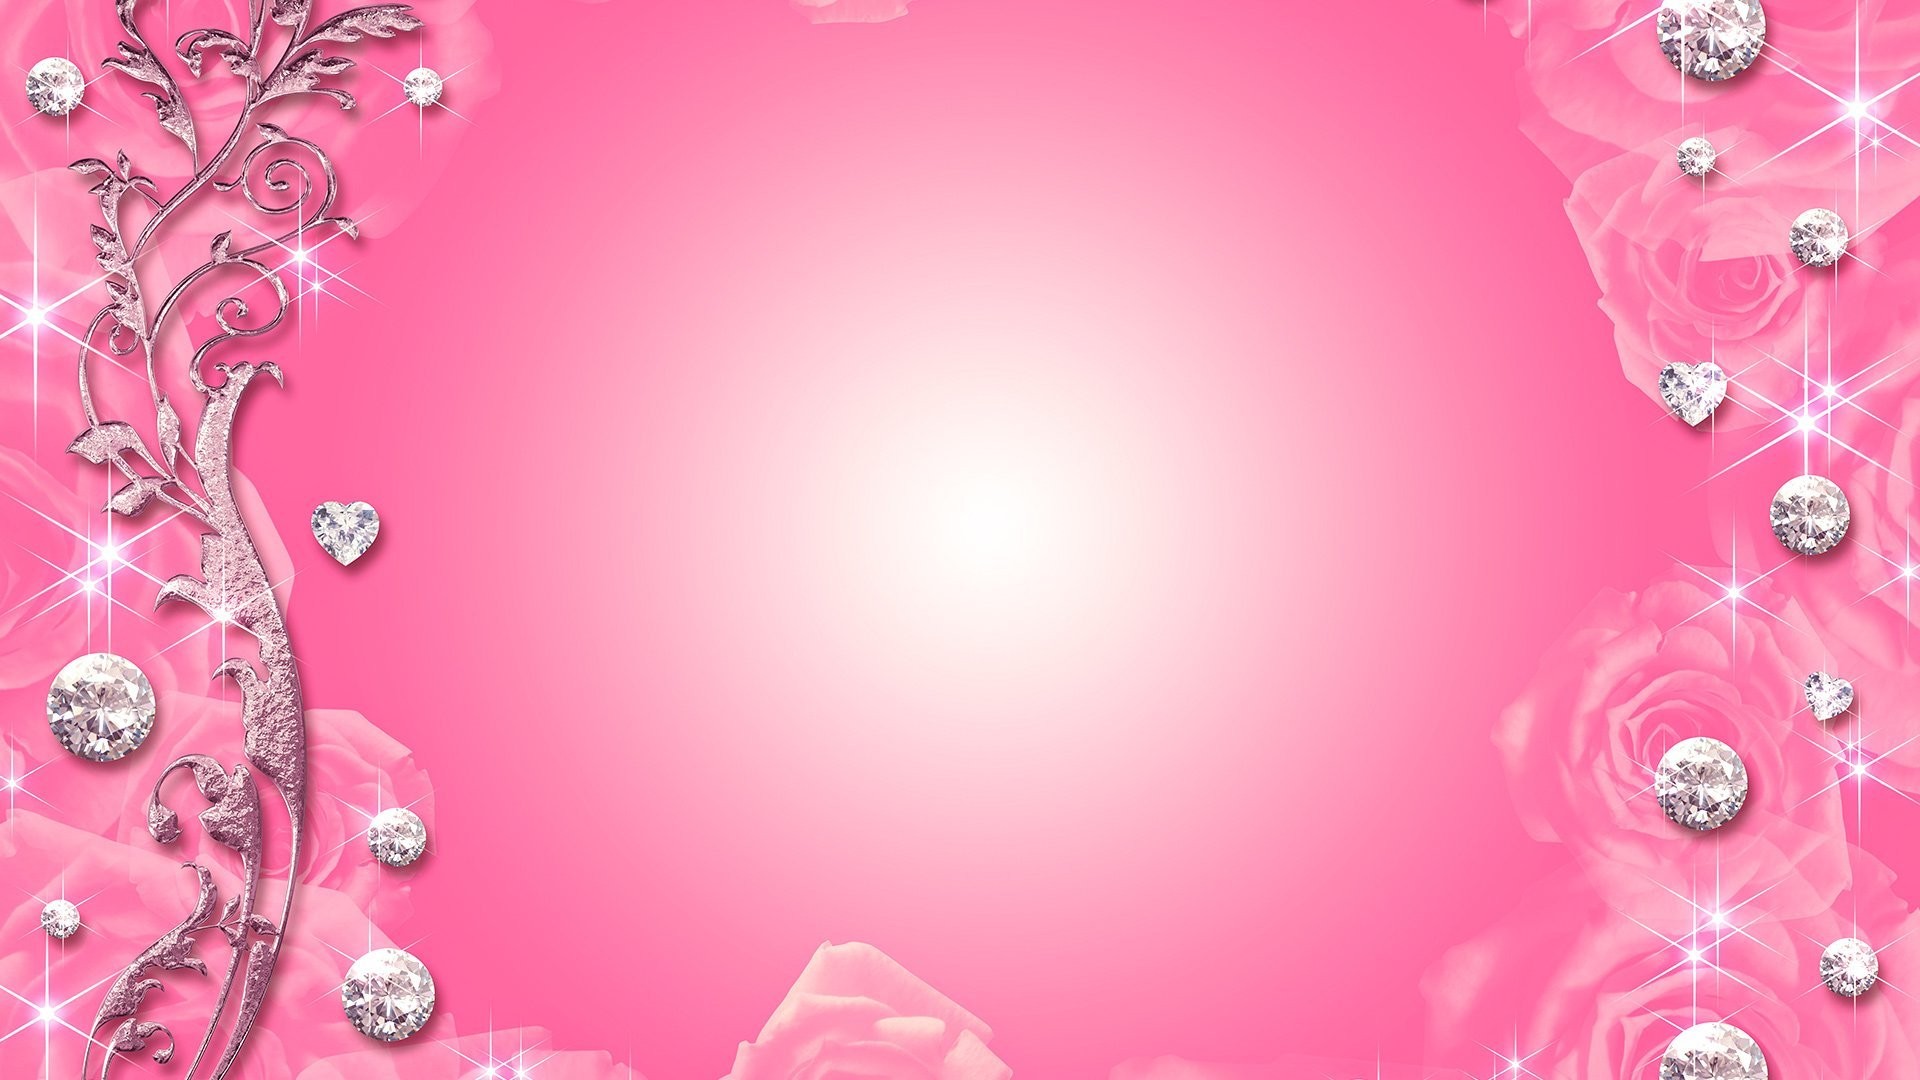 Pink Backgrounds Wallpapers, Backgrounds, Images, Art Photos